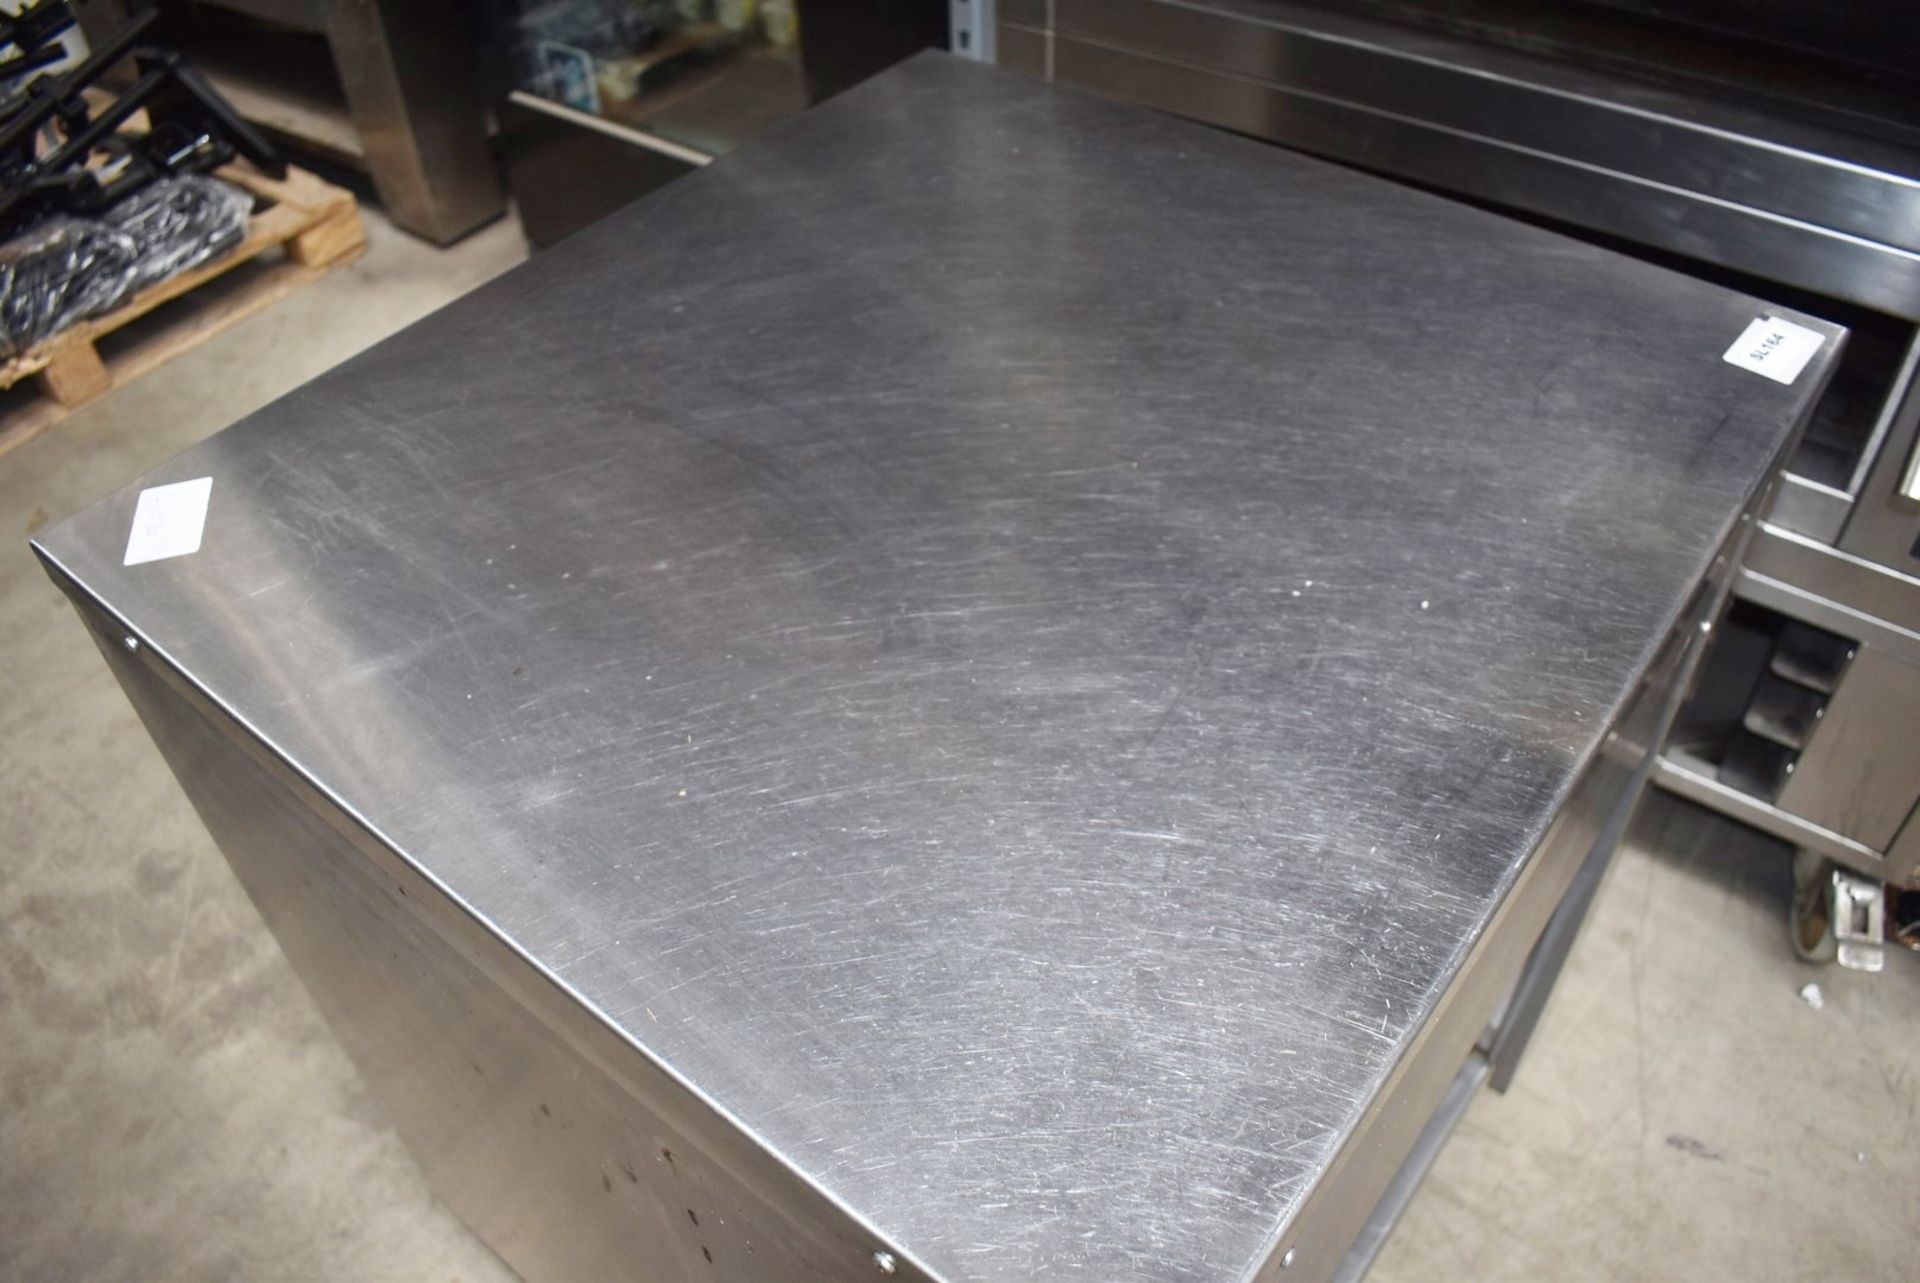 1 x Stainless Steel EMH Mobile Kitchen Unit Featuring Undershelves and Castor Wheels - Dimensions: - Image 7 of 7